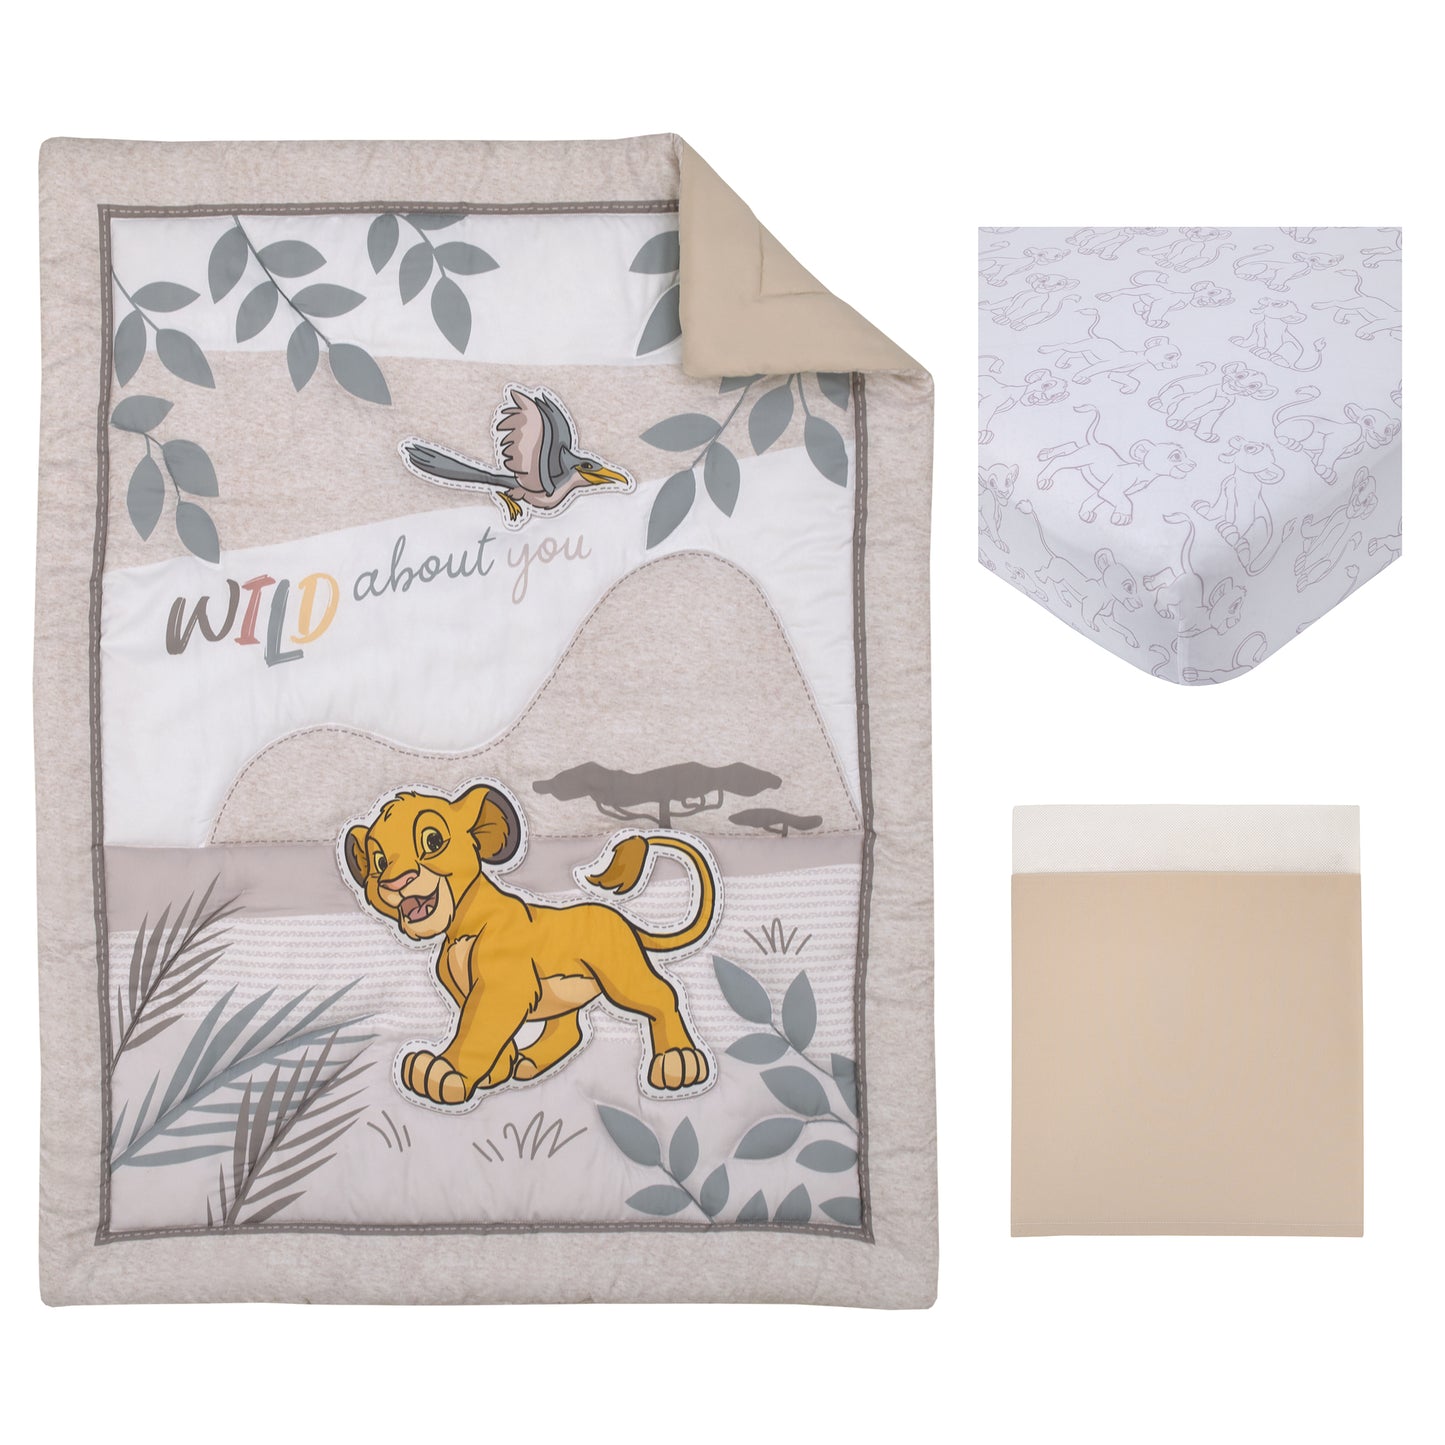 Disney Lion King - Wild About You Taupe, White and Teal Simba 3 Piece Nursery Crib Bedding Set - Comforter, Fitted Crib Sheet and Crib Skirt